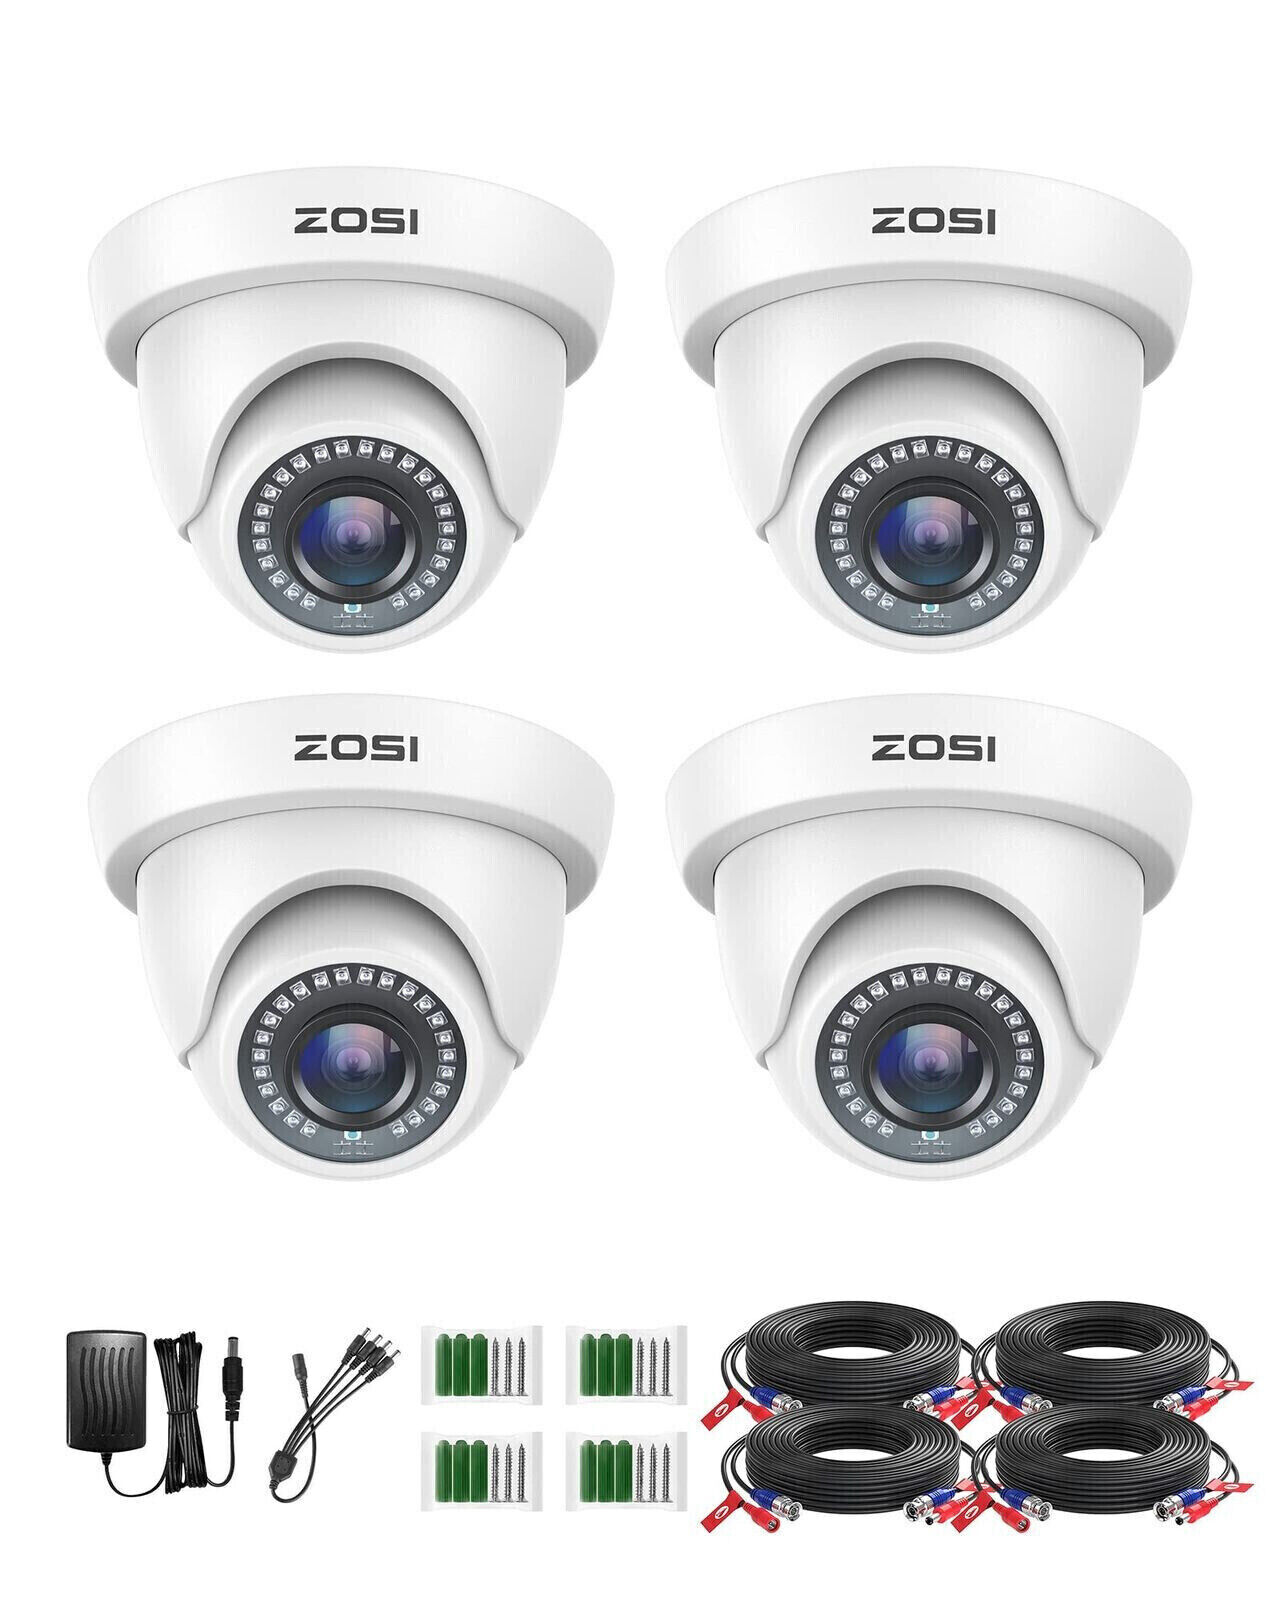 ZOSI 4Pcs 1080p TVI Outdoor CCTV Home Surveillance Security Dome Camera System ZOSI Does Not Apply